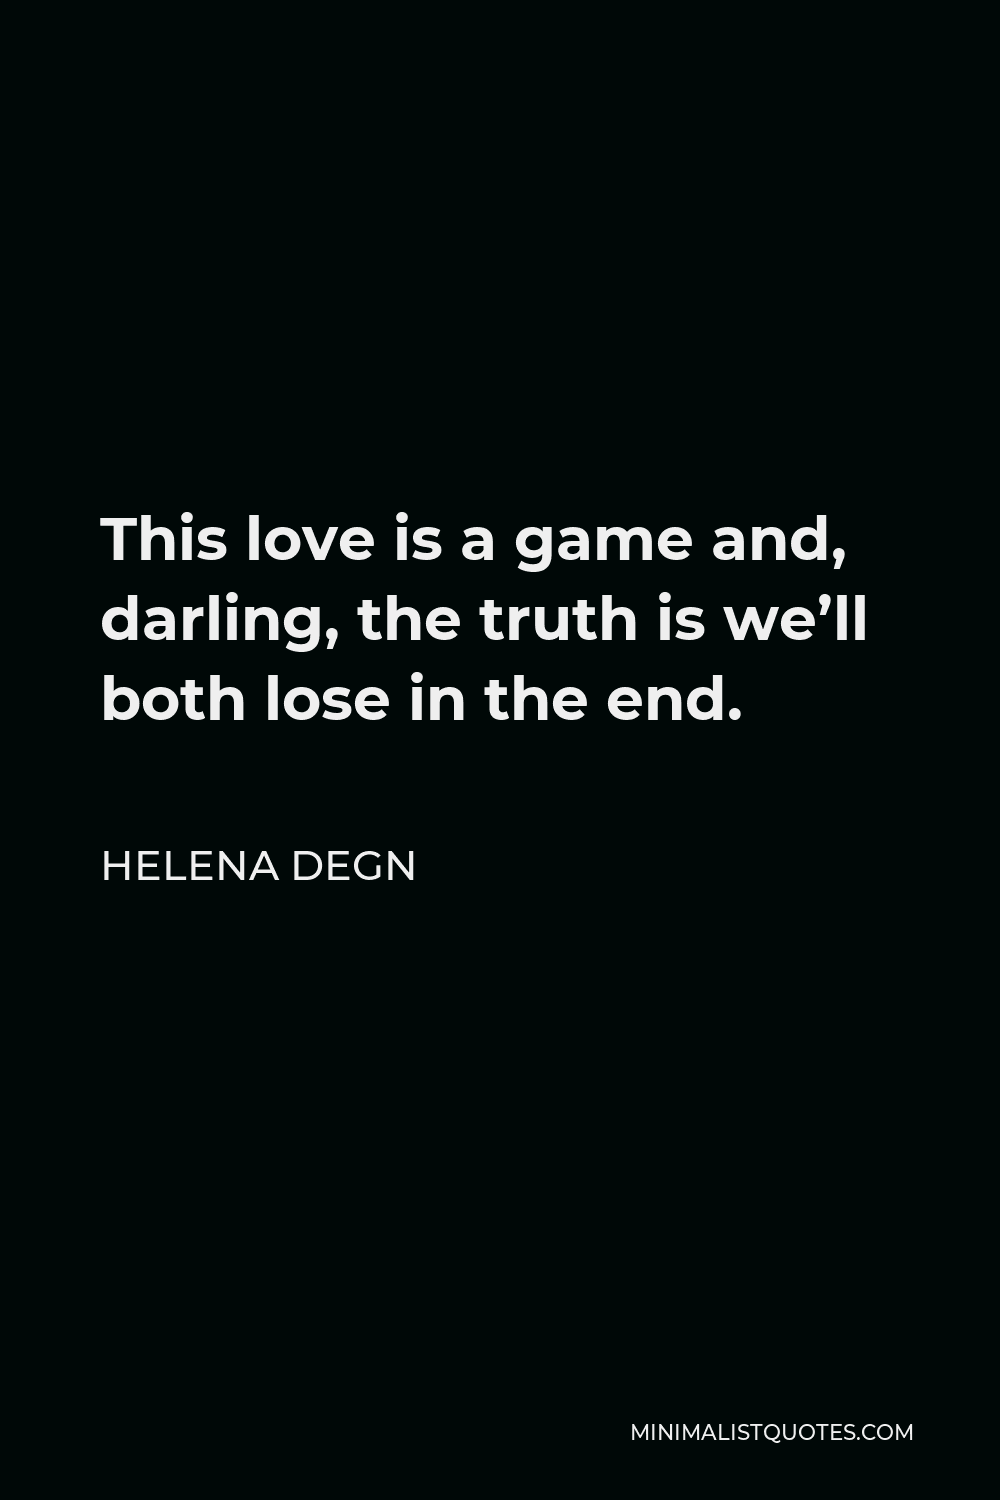 Helena Degn Quote - This love is a game and, darling, the truth is we’ll both lose in the end.